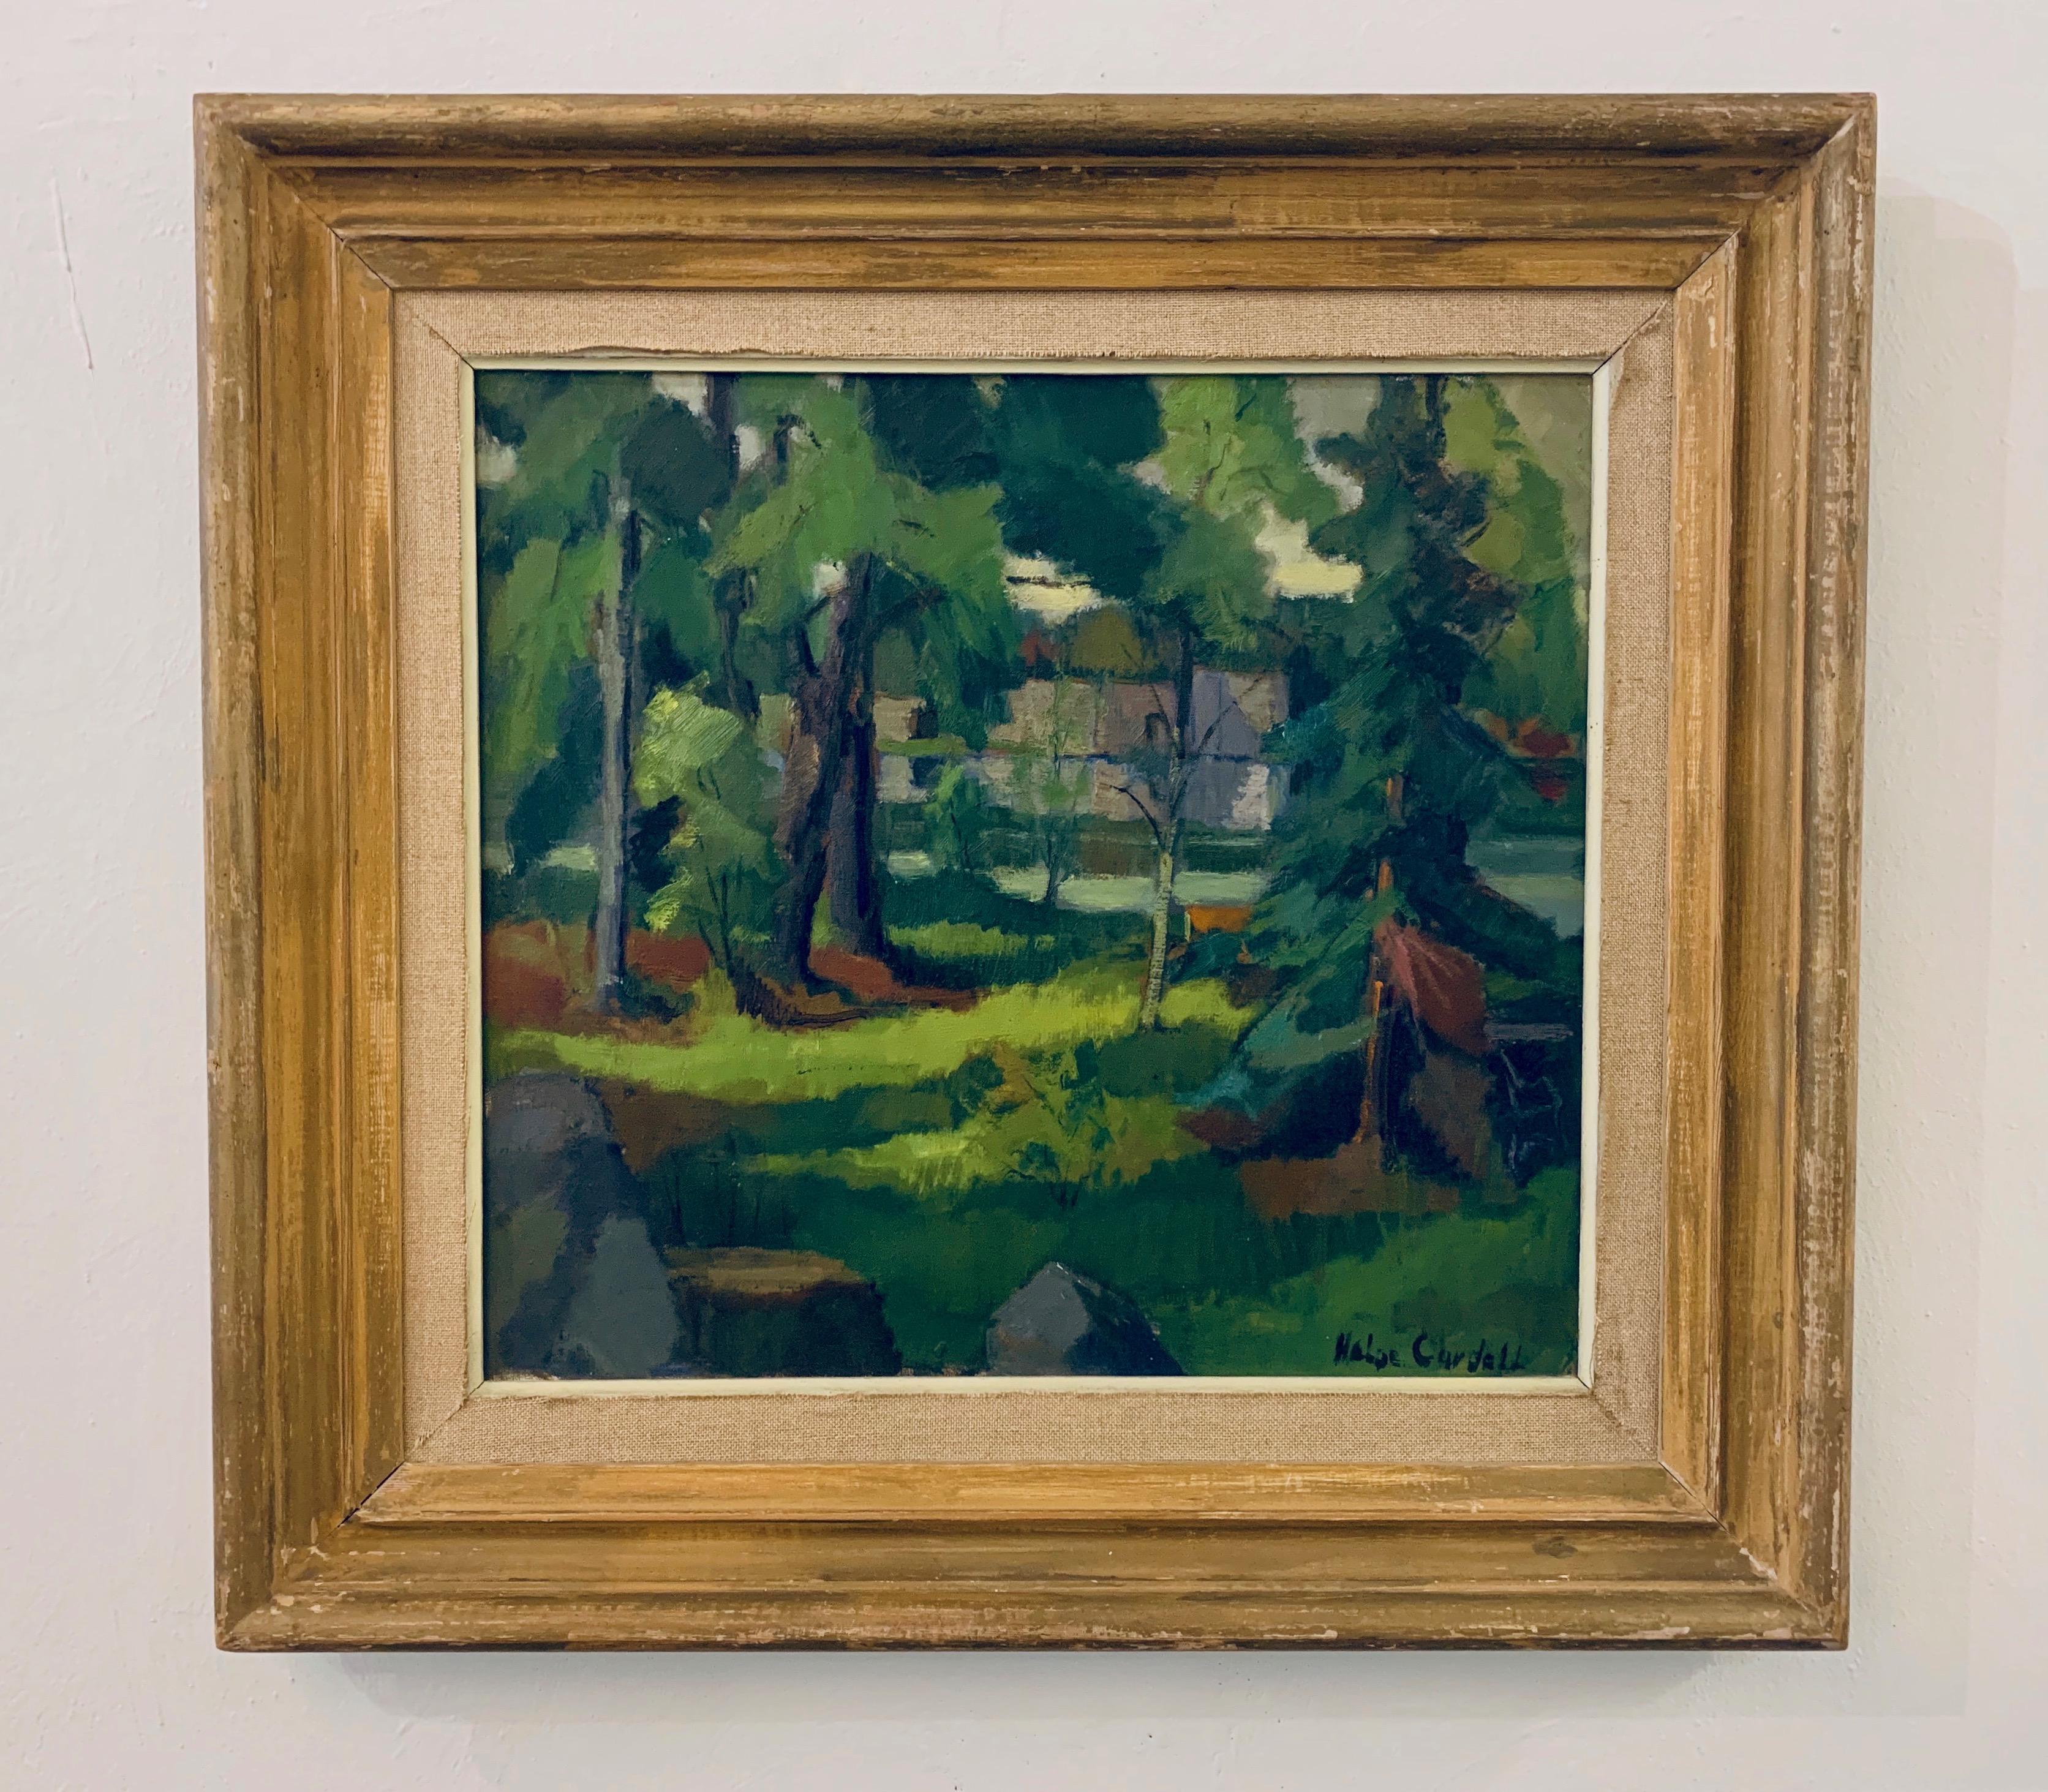 Paper Midcentury Swedish Modern Green Forrest Gouache Painting by Helge Cardell